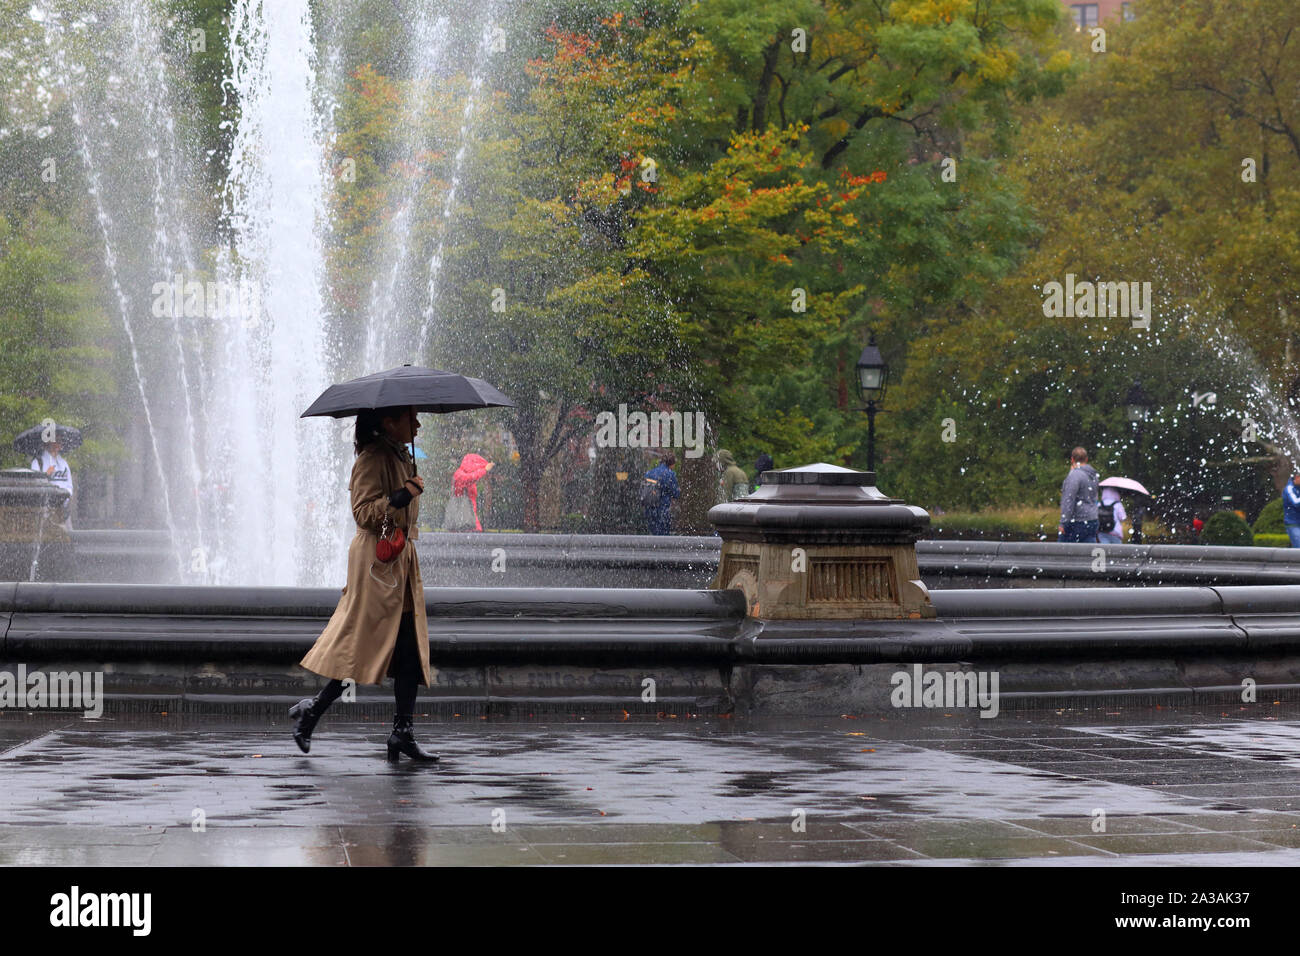 A woman with an umbrella walks by the Washington Square Park fountain on a drizzy, rainy day in New York City Stock Photo